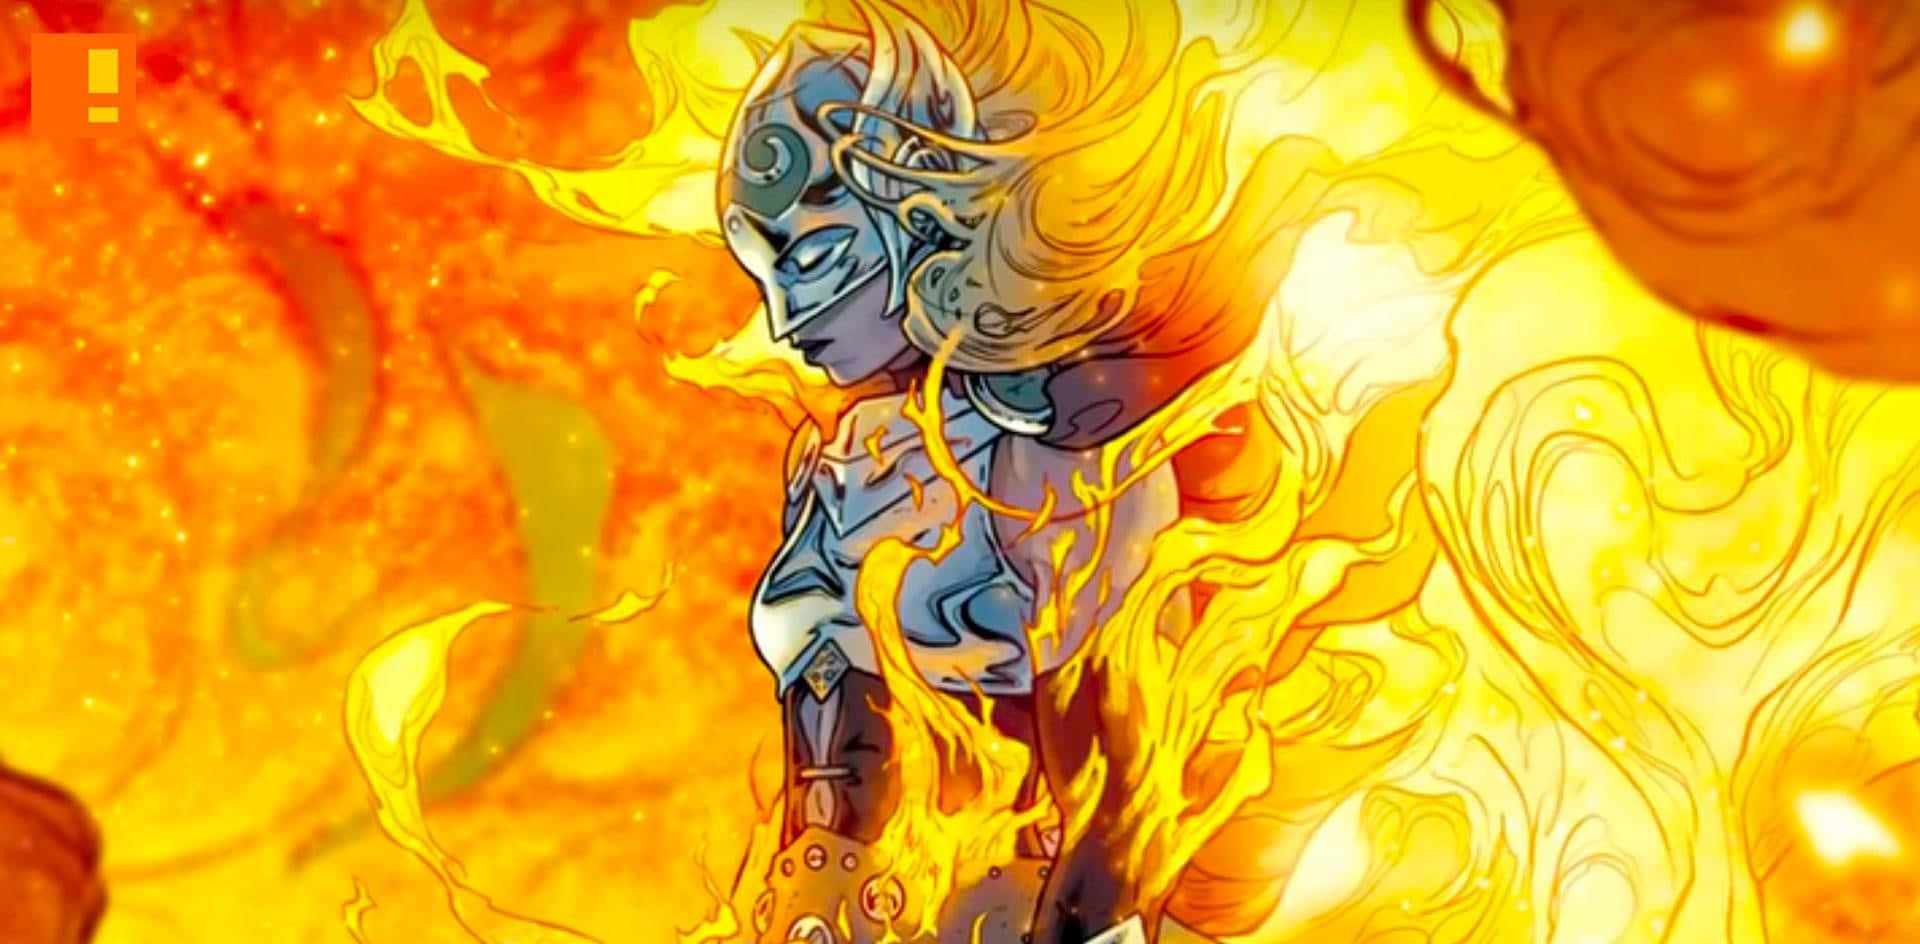 Jane Foster as Mighty Thor in her vibrant and powerful glory Wallpaper